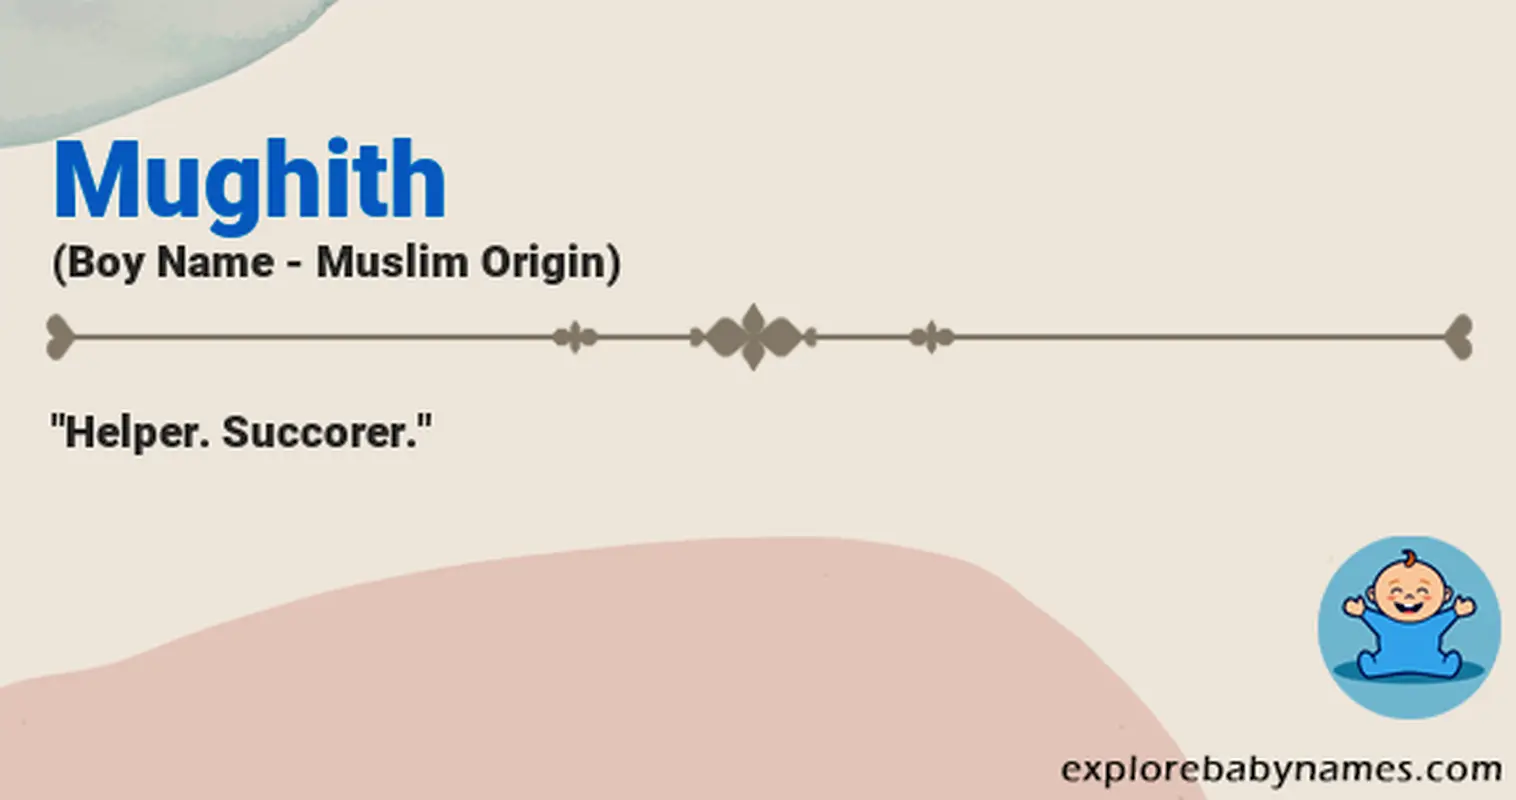 Meaning of Mughith